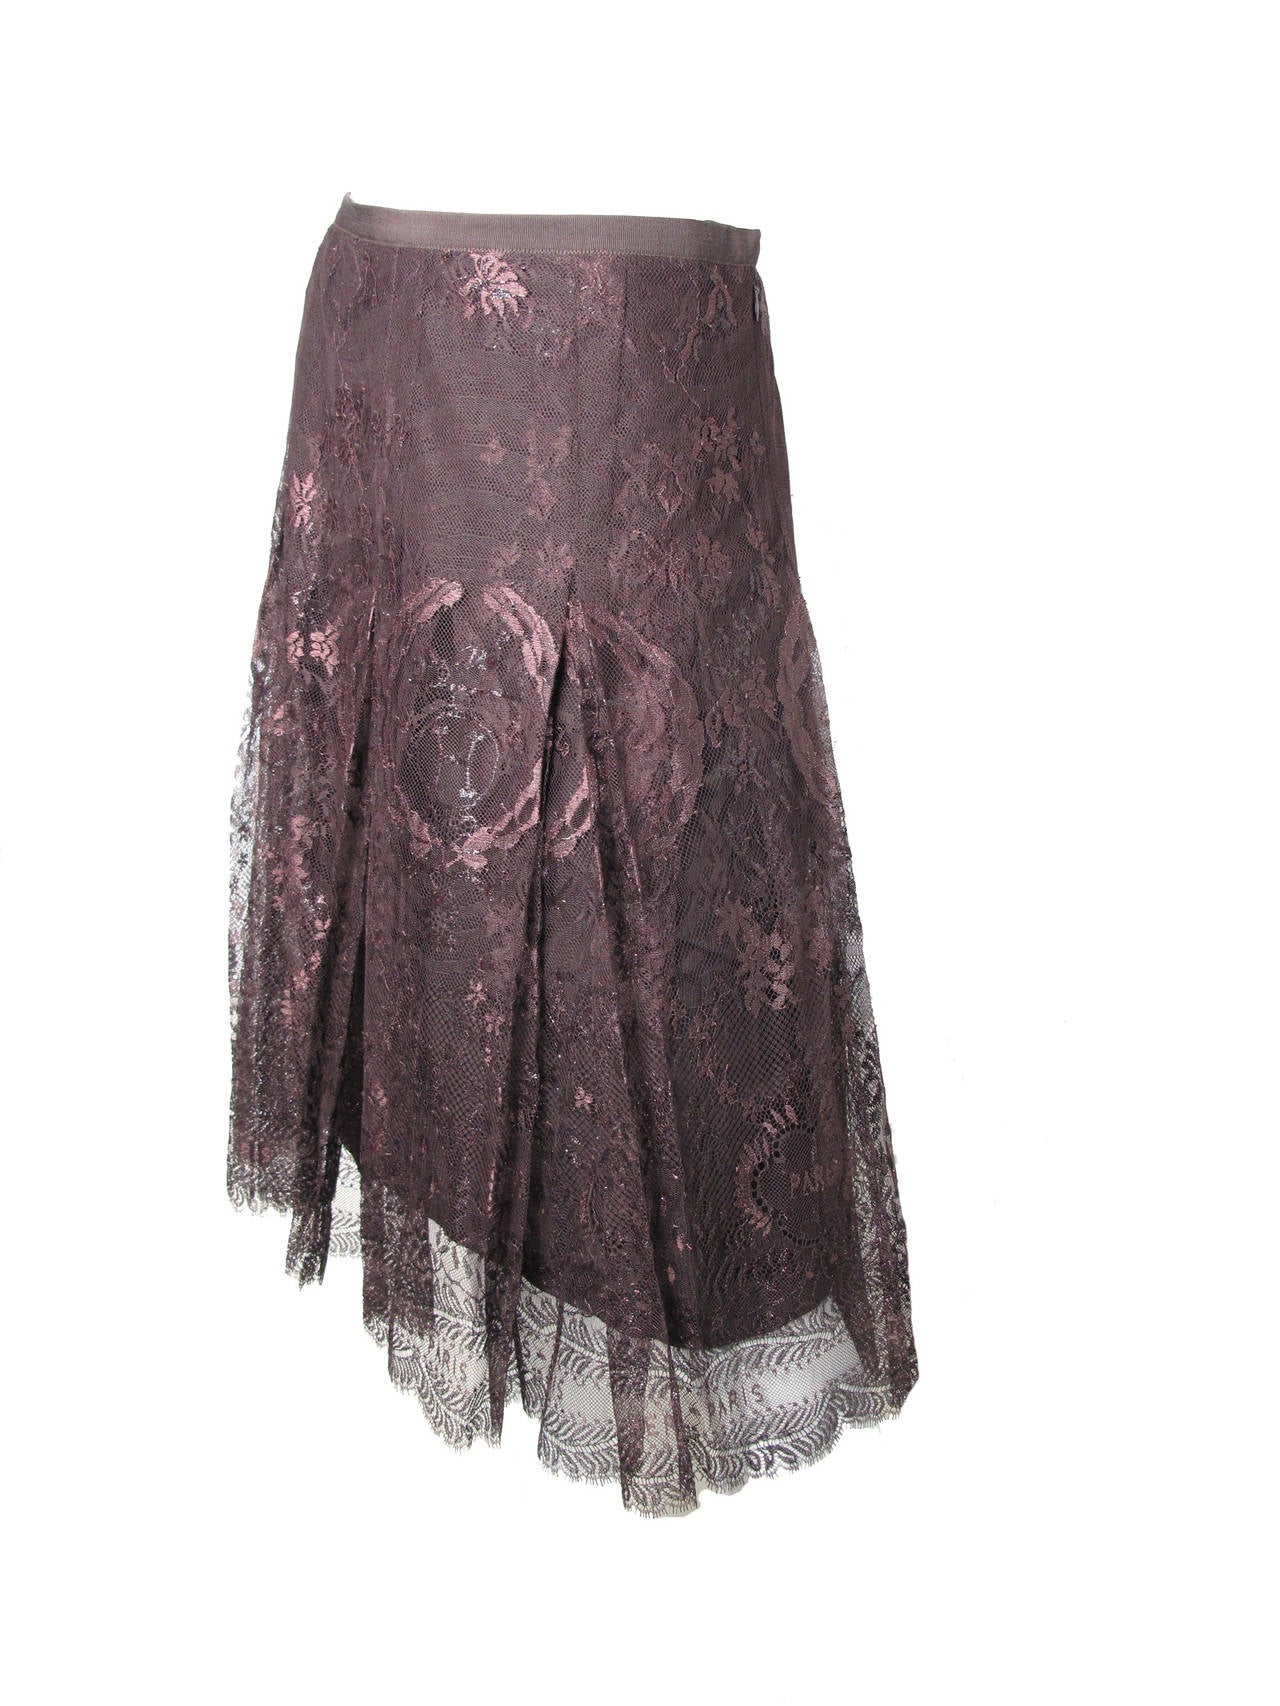 Wonderful Hermes reddish brown lace skirt with Hermes logo and Paris throughout.  Created by Jean Paul Gaultier for Hermes runway 2006.  Strong lace fabric made of Polyamide, tactile and polyester.  Wool & silk brown lining. 
Grosgrain ribbon